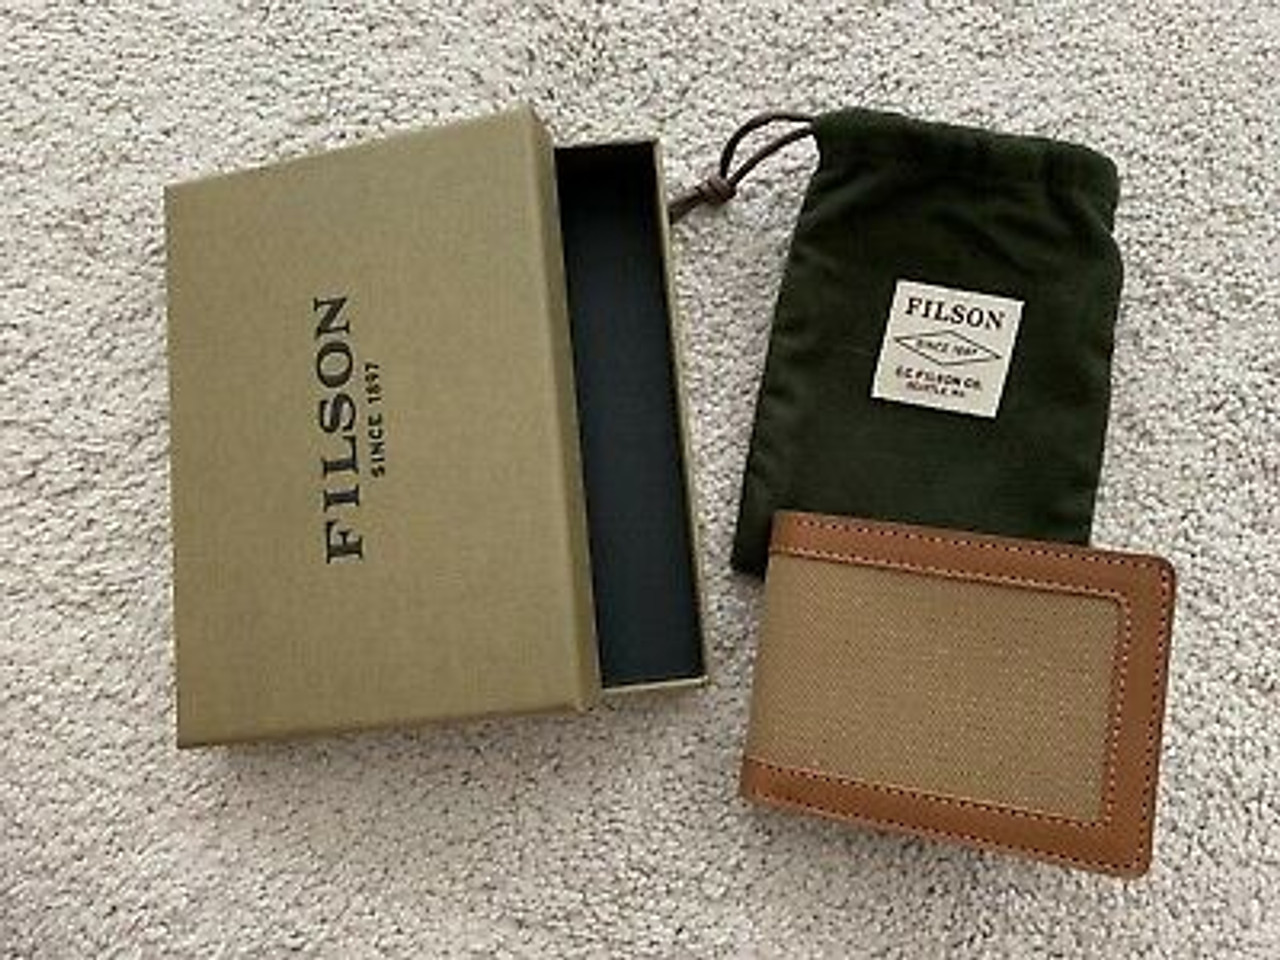 Filson Rugged Twill Outfitter Wallet